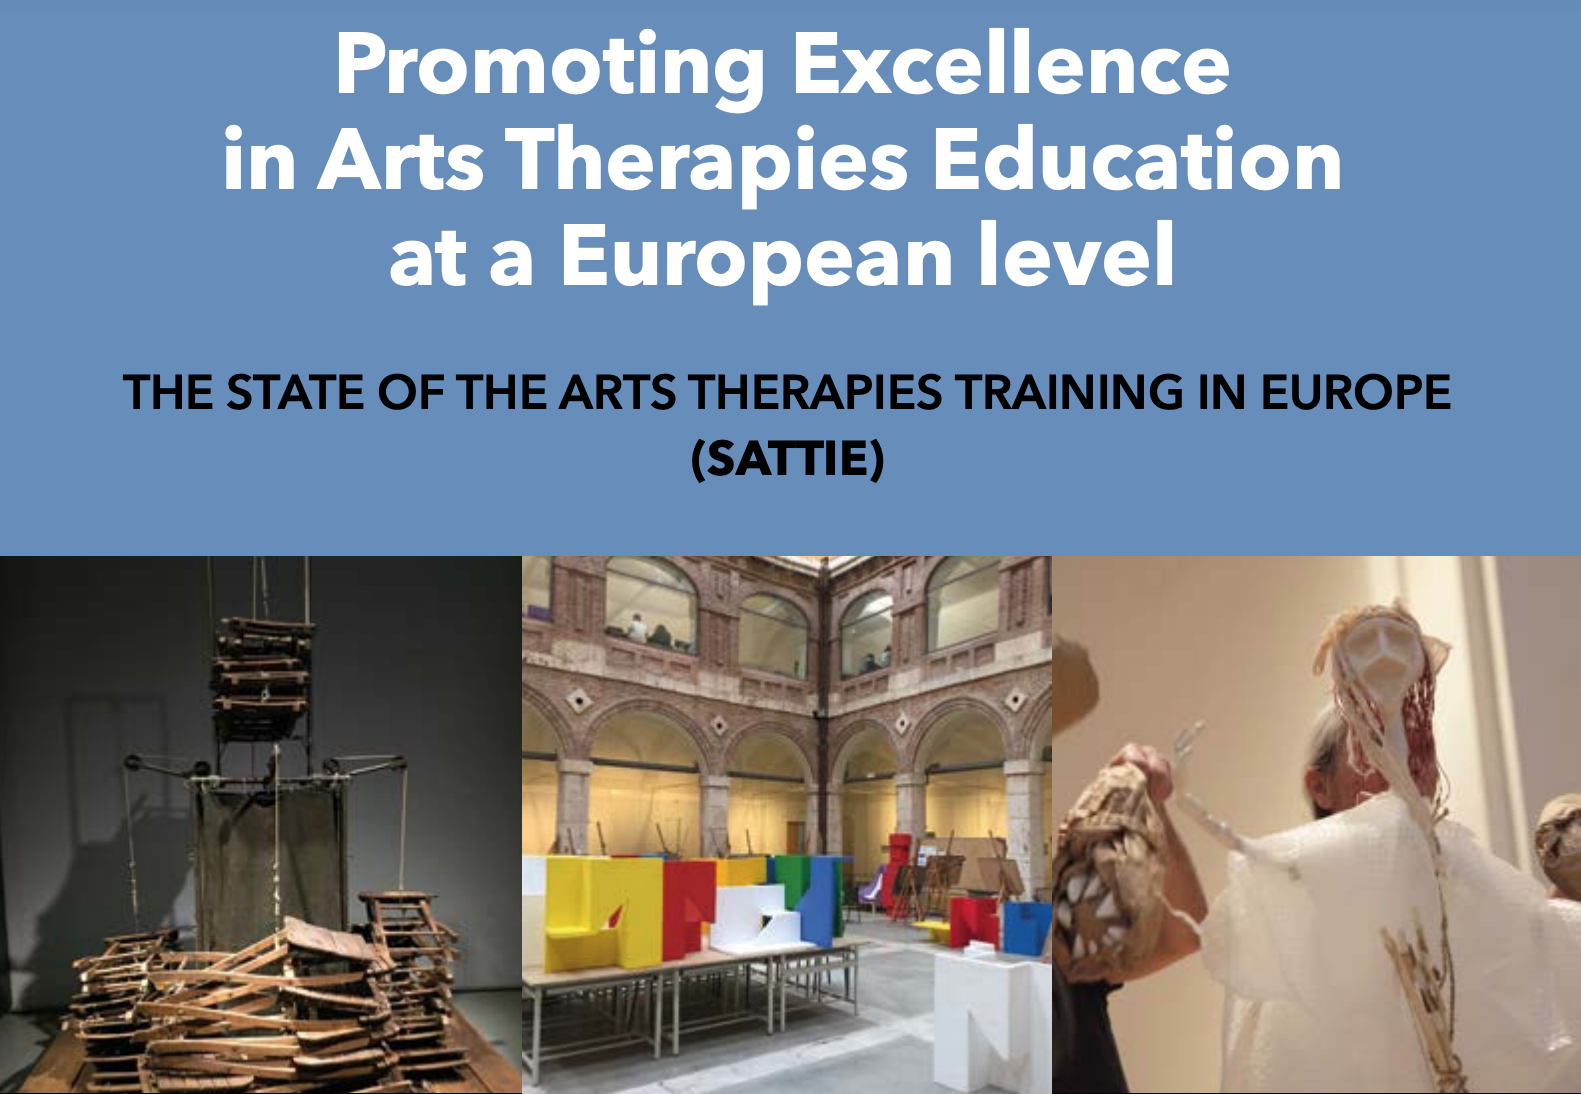 Report of the State of Arts Therapies Training in Europe (SATTIE). First phase. - 1